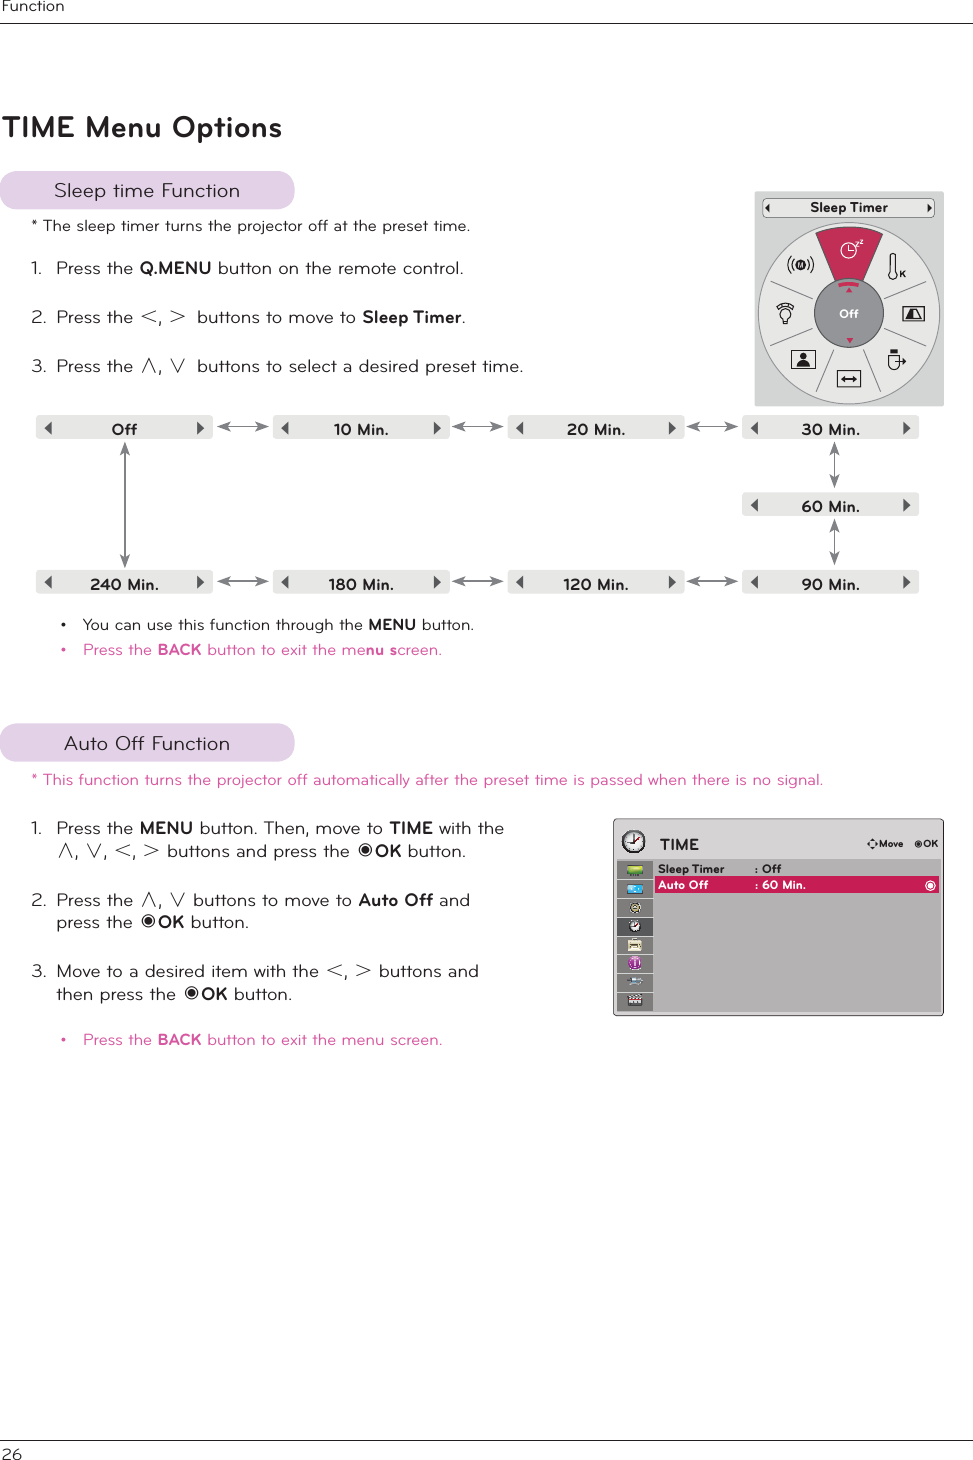 Function26* The sleep timer turns the projector off at the preset time.1. Press the Q.MENU button on the remote control.2.  Press the ˘, ˚buttons to move to Sleep Timer.3. Press the ġ, Ģbuttons to select a desired preset time.•  You can use this function through the MENU button.• Press the BACK button to exit the menu screen.Sleep time FunctionAuto Off FunctionTIME Menu Options1.  Press the MENU button. Then, move to TIME with the ġ, Ģ, ˘, ˚ buttons and press the 󱡧OK button.2.  Press the ġ, Ģ buttons to move to Auto Off and press the 󱡧OK button.3.  Move to a desired item with the ˘, ˚ buttons and then press the 󱡧OK button.• Press the BACK button to exit the menu screen.*  This function turns the projector off automatically after the preset time is passed when there is no signal.ᯧ Off  ᯓ ᯧ 10 Min.  ᯓ ᯧ 20 Min.  ᯓ ᯧ 30 Min.  ᯓᯧ 240 Min.  ᯓ ᯧ 180 Min.  ᯓ ᯧ 120 Min.  ᯓ ᯧ 90 Min.  ᯓᯧ 60 Min.  ᯓTIMESleep Timer  :  OffAuto Off  : 60 Min.ᰰMove   ᰷OKSleep TimerOff